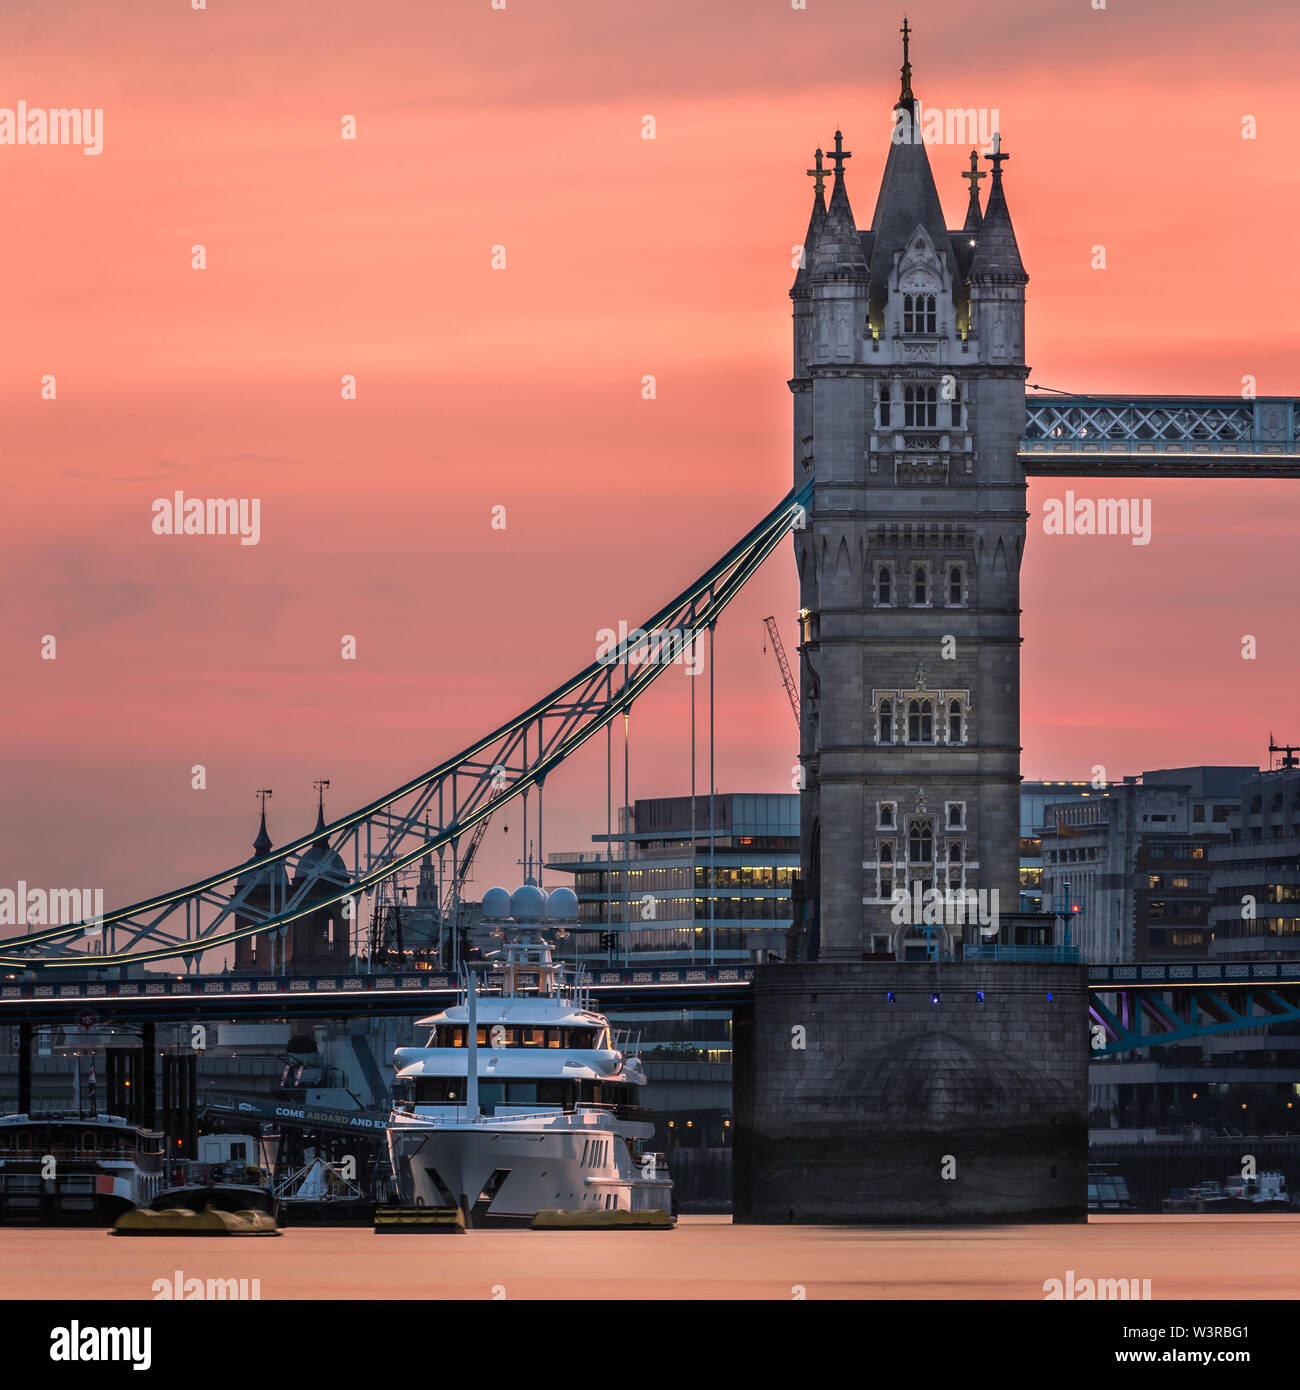 Amels superyacht Sixth Sense moored at Butler's Wharf by Tower Bridge in London at sunset. Stock Photo